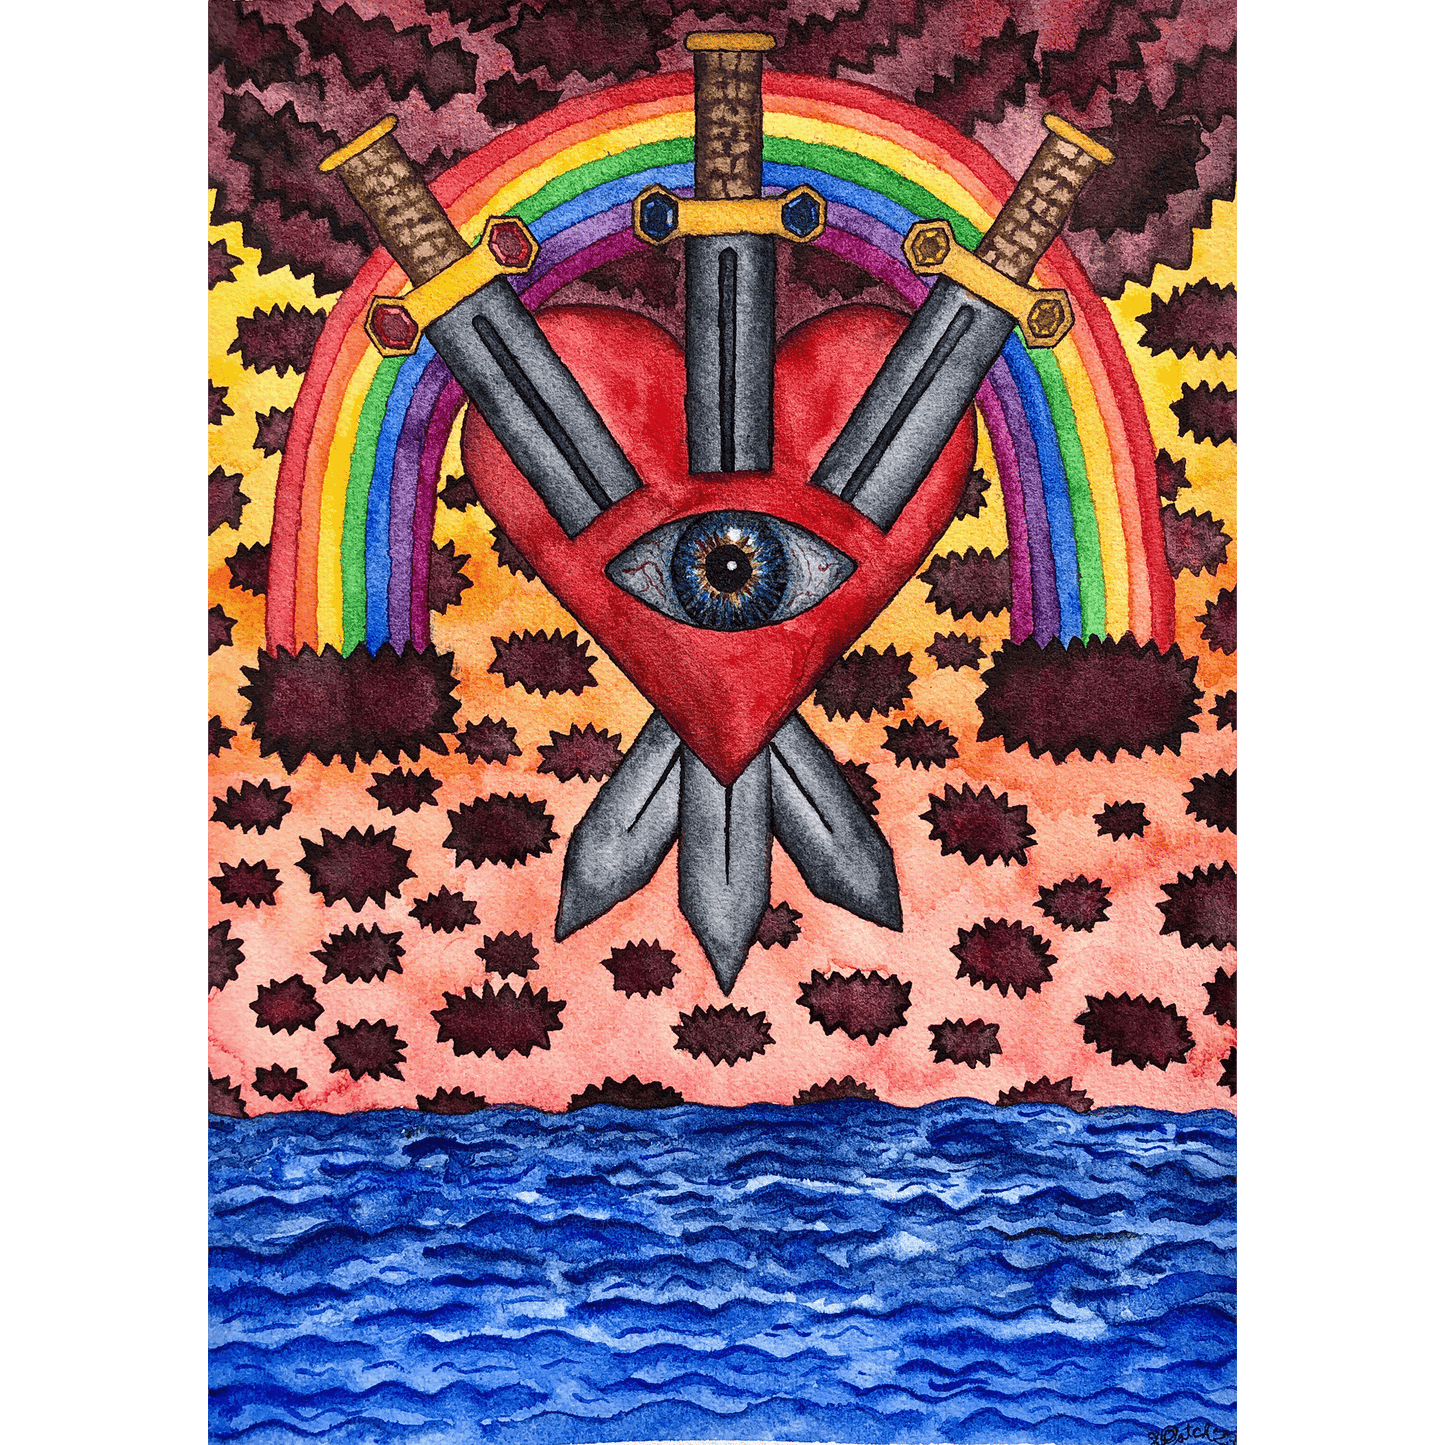 "The Flood Couldn't Stop My Pain (3 of Swords)" Print